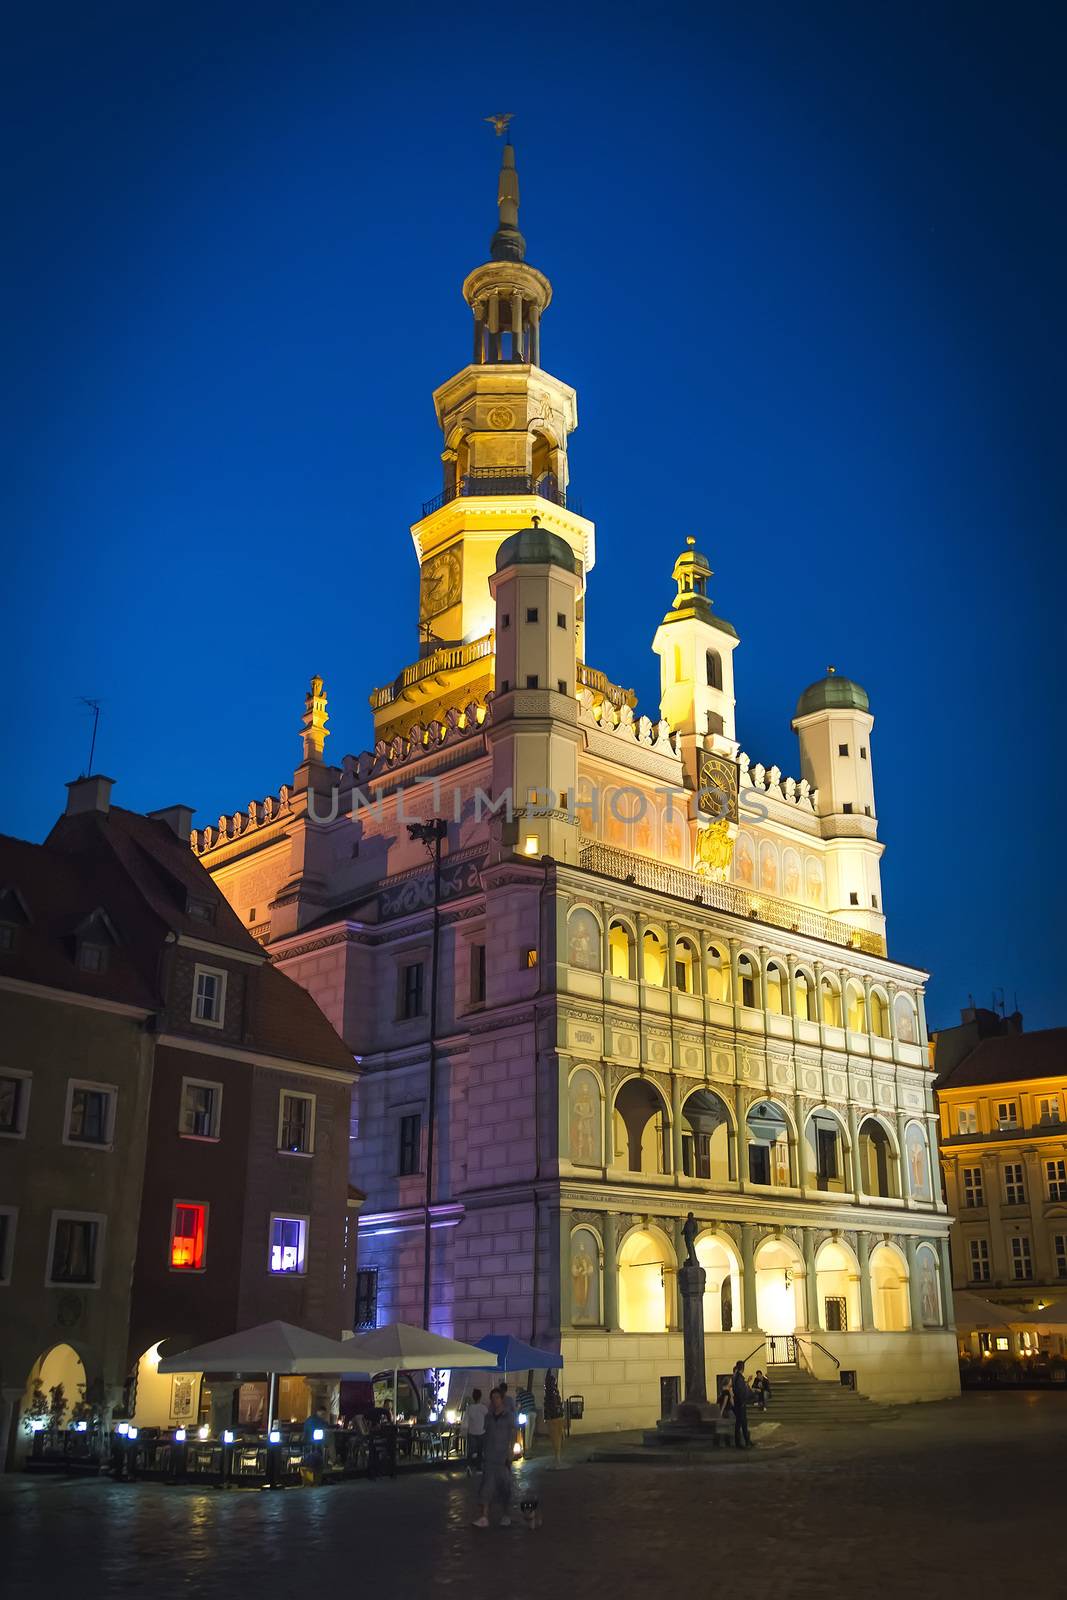 old town hall in Poznan - photo taken at night by furzyk73